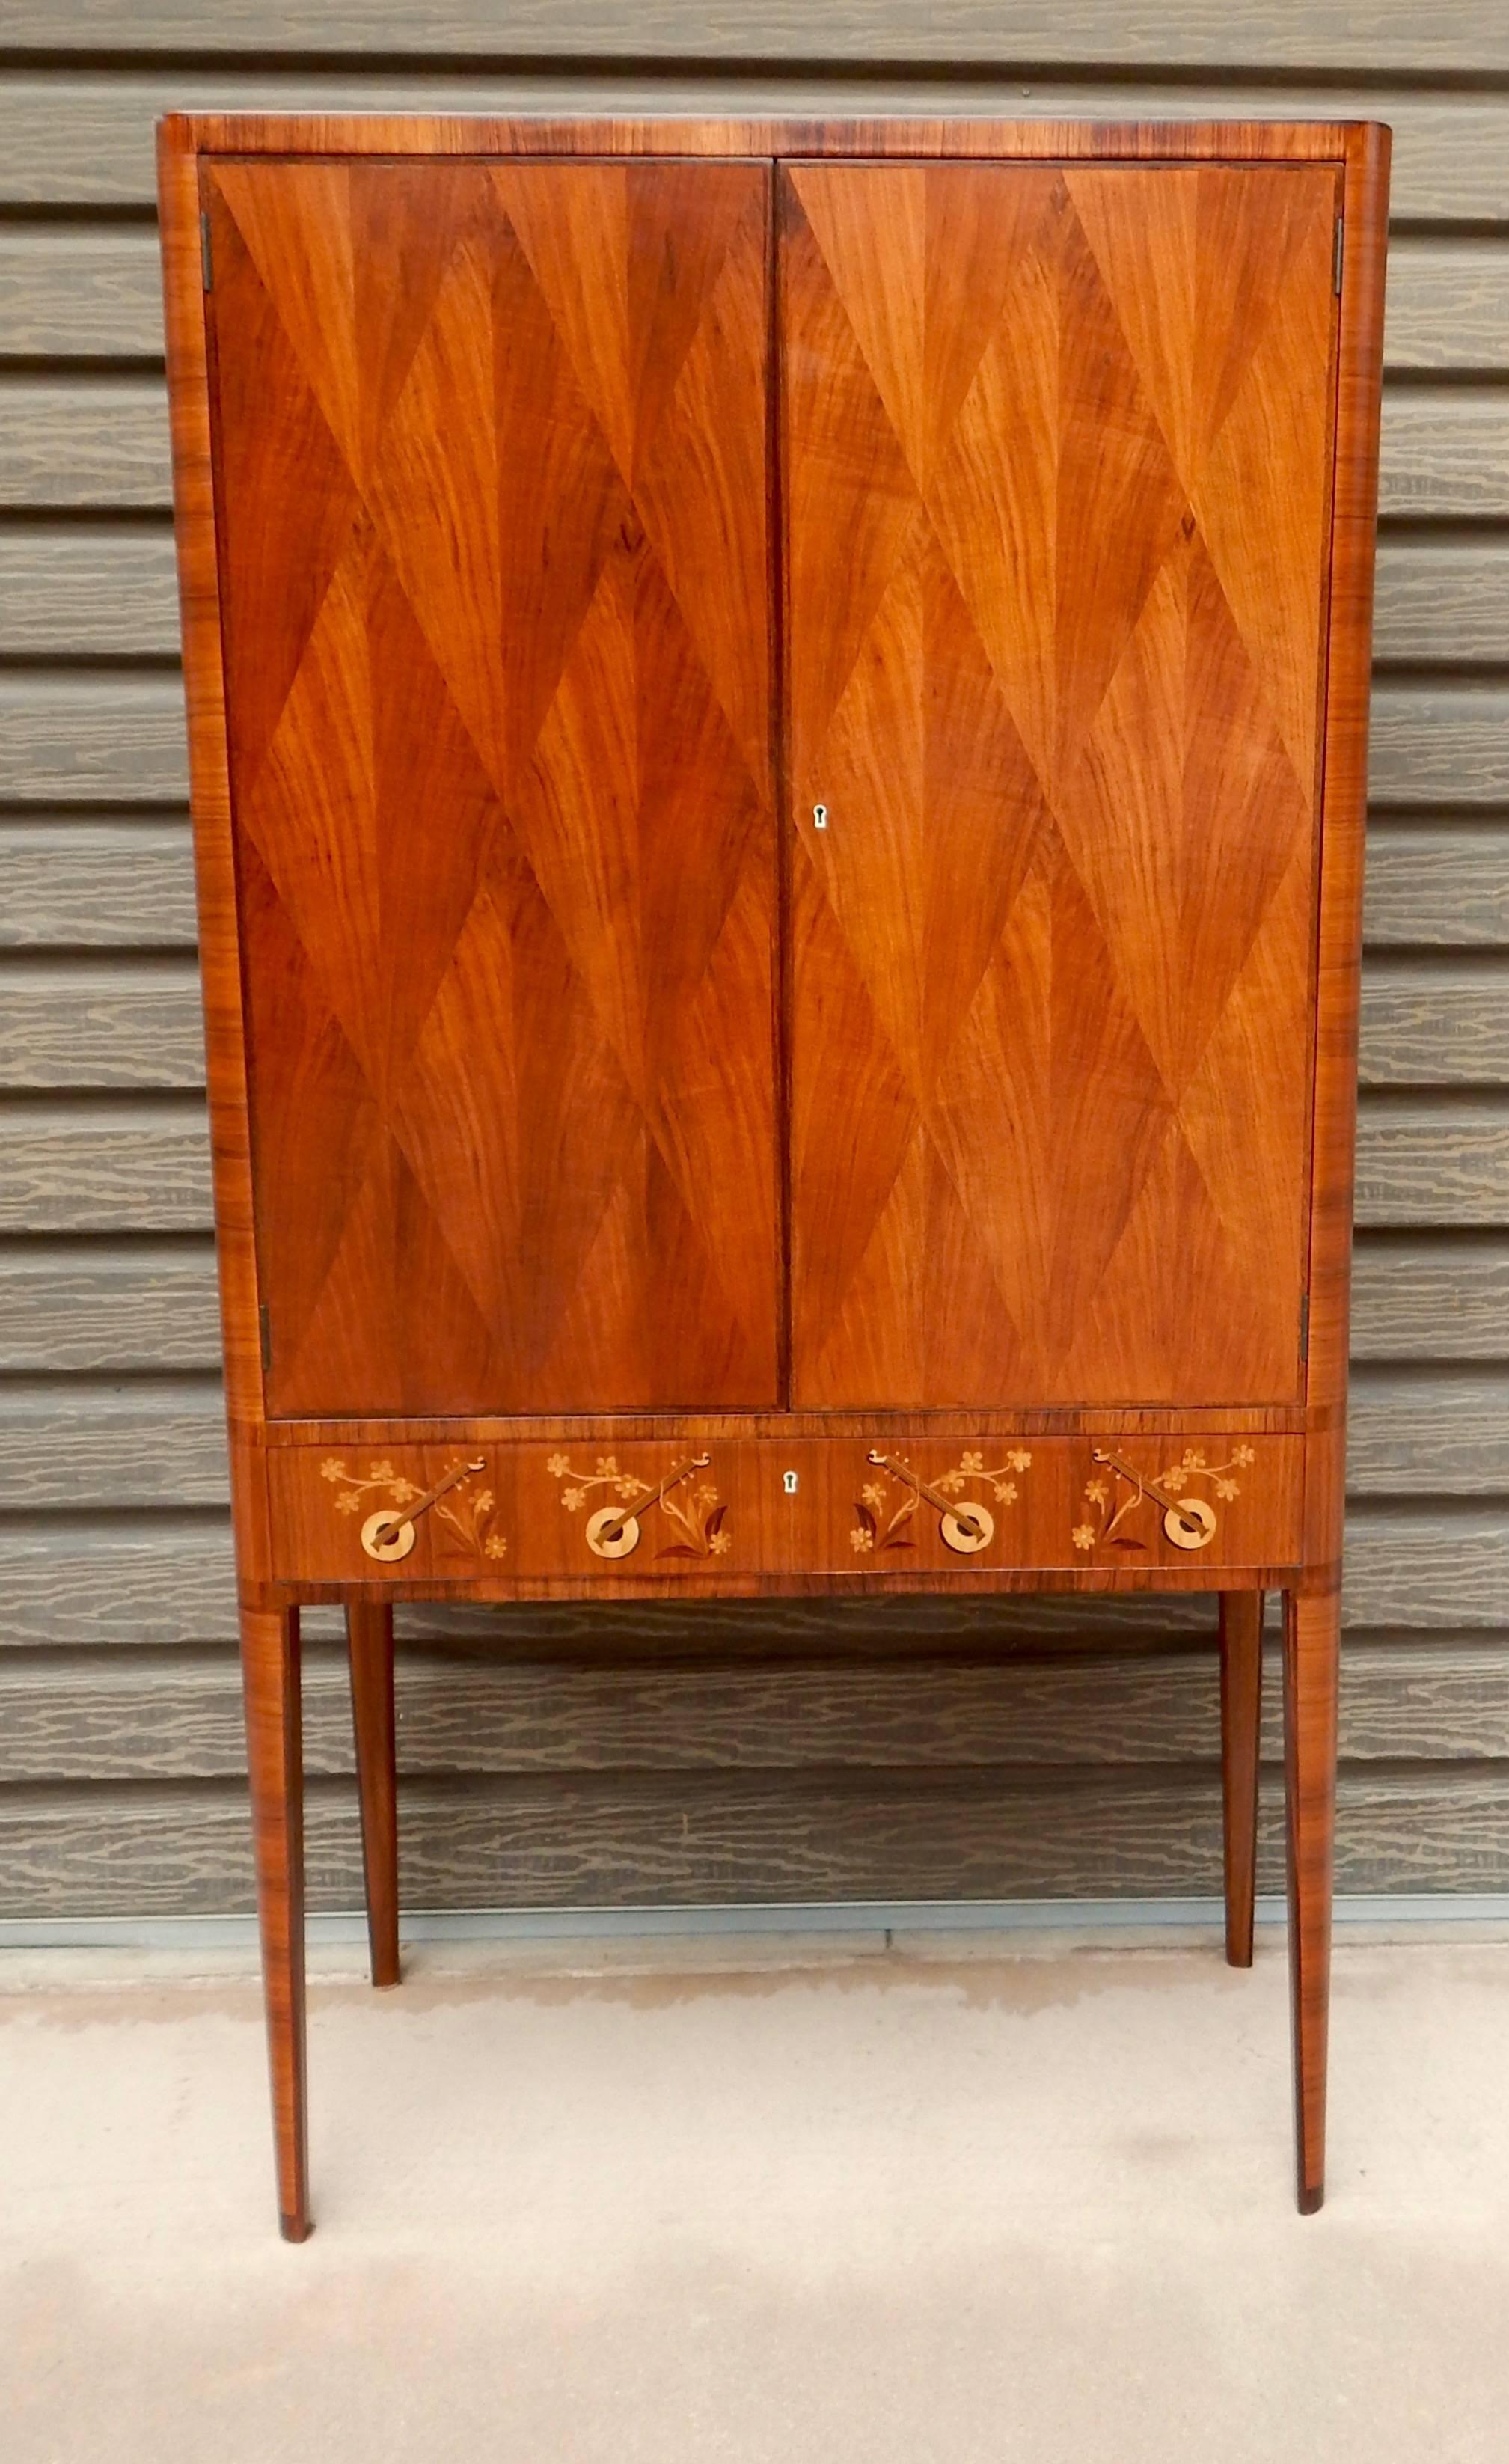 Swedish inlaid storage cabinet, circa 1940. Doors in diamond pattern bookmatched walnut parquetry. Drawer with marquetry in musical instrument theme. This cabinet was just restored to its original luster by our craftsmen.